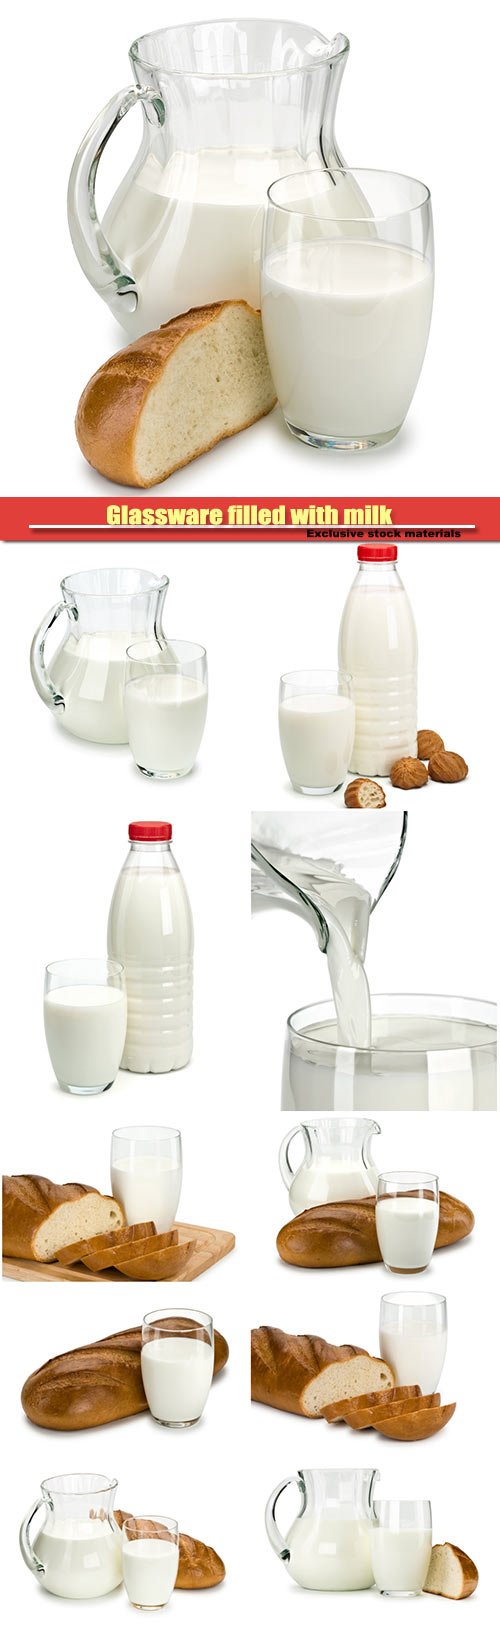 Glassware filled with milk and a white loaf long loaf